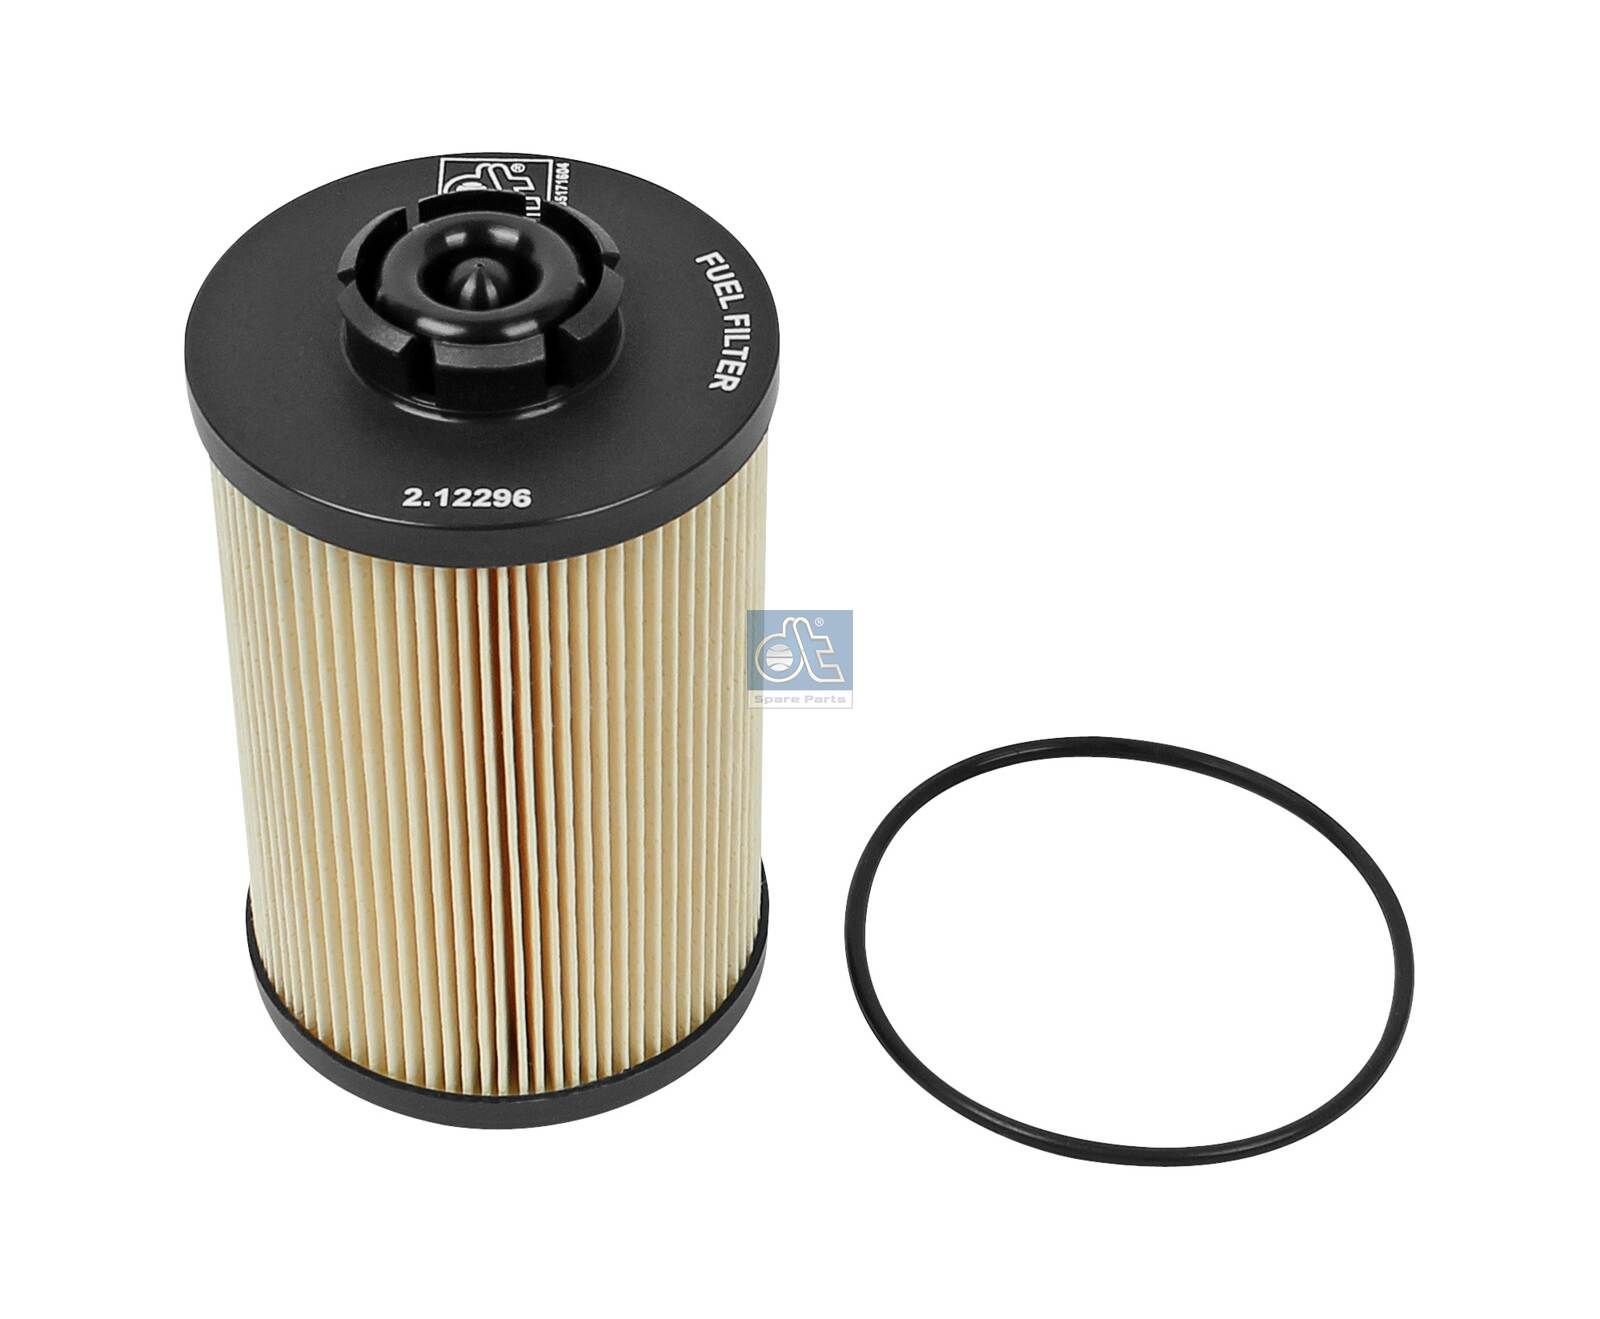 PU 1058X DT Spare Parts 2.12296 Fuel filter 02931530